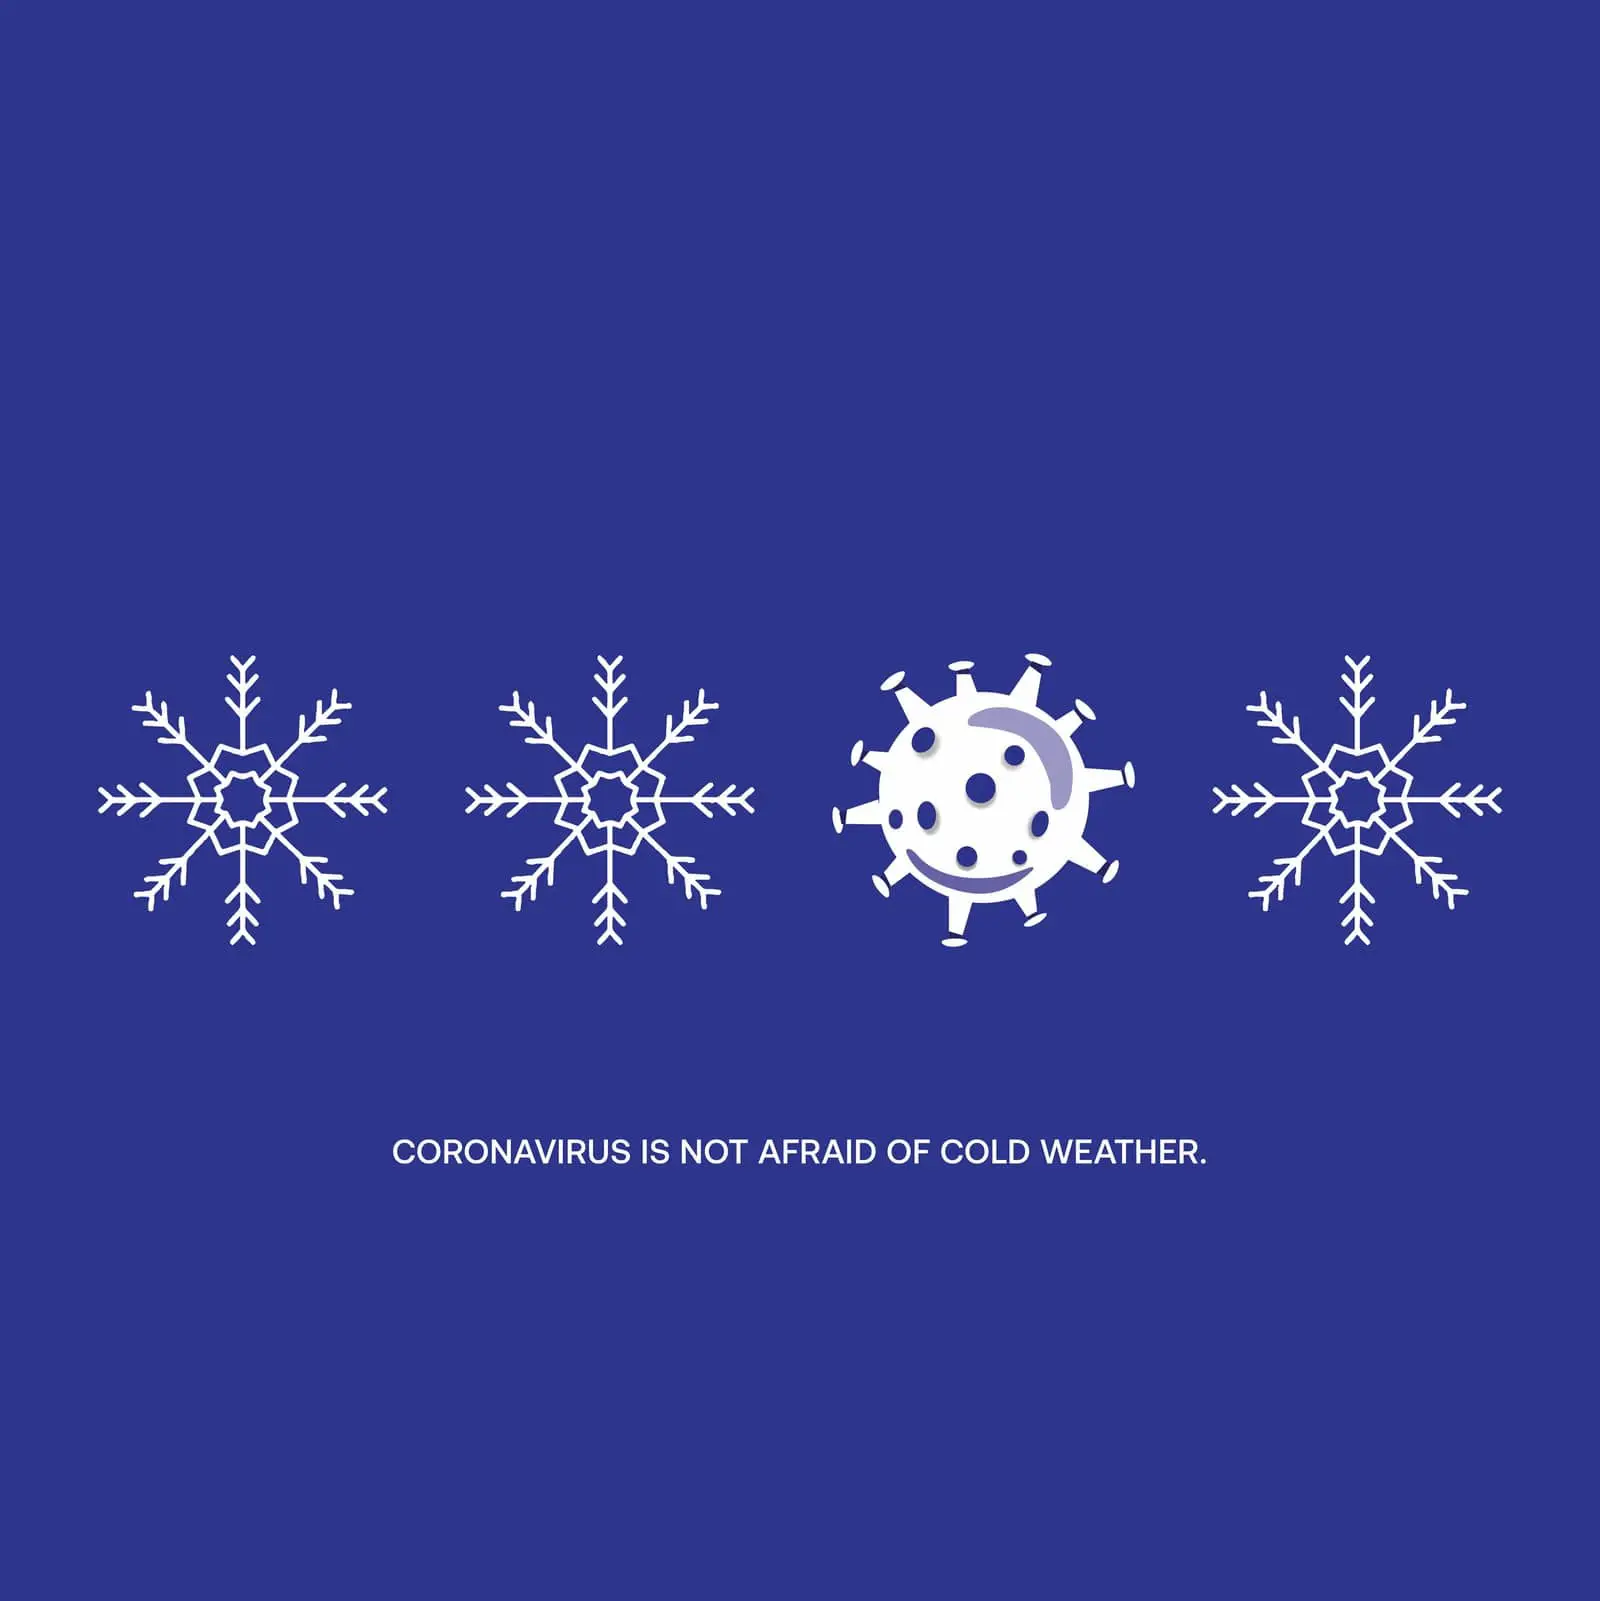 covid is not afraid of cold weather illustration by United Nations